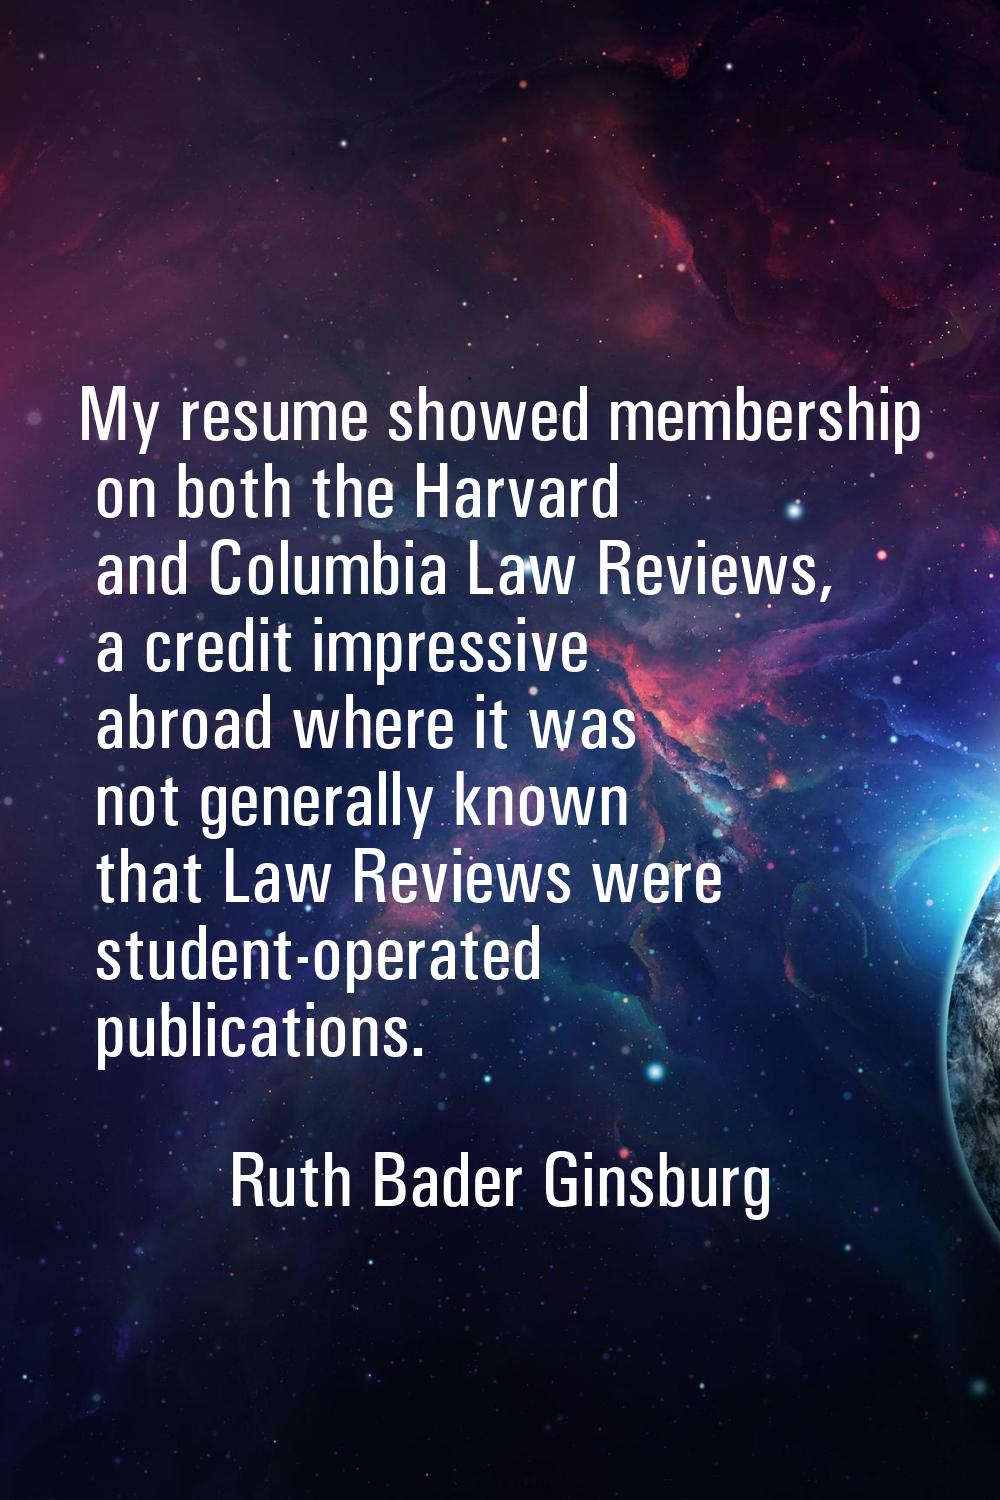 My resume showed membership on both the Harvard and Columbia Law Reviews, a credit impressive abroa